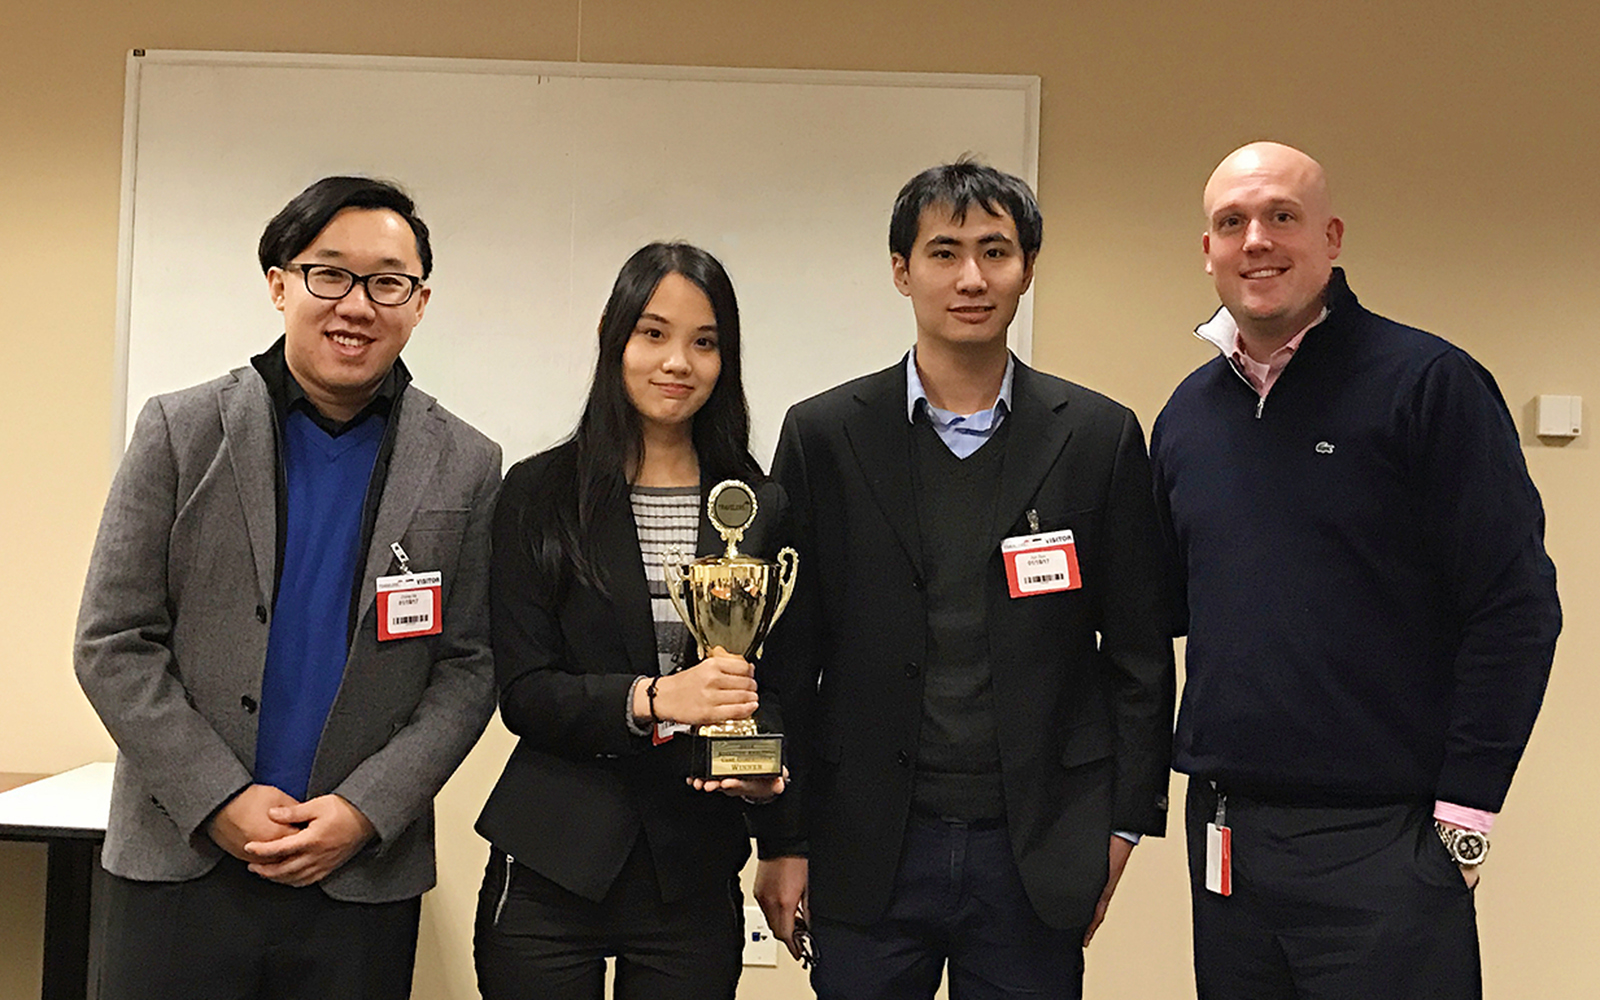 Photo, left to right: MSBAPM students Zhong He '17, Xin "Amy" Ni '16, and Jun Sun '16 pose for a photo with Patrick Buckley, manager of the Advanced Analytics Leadership Development Program at Travelers, following the UConn team’s victory. (Xin "Amy'' Ni)